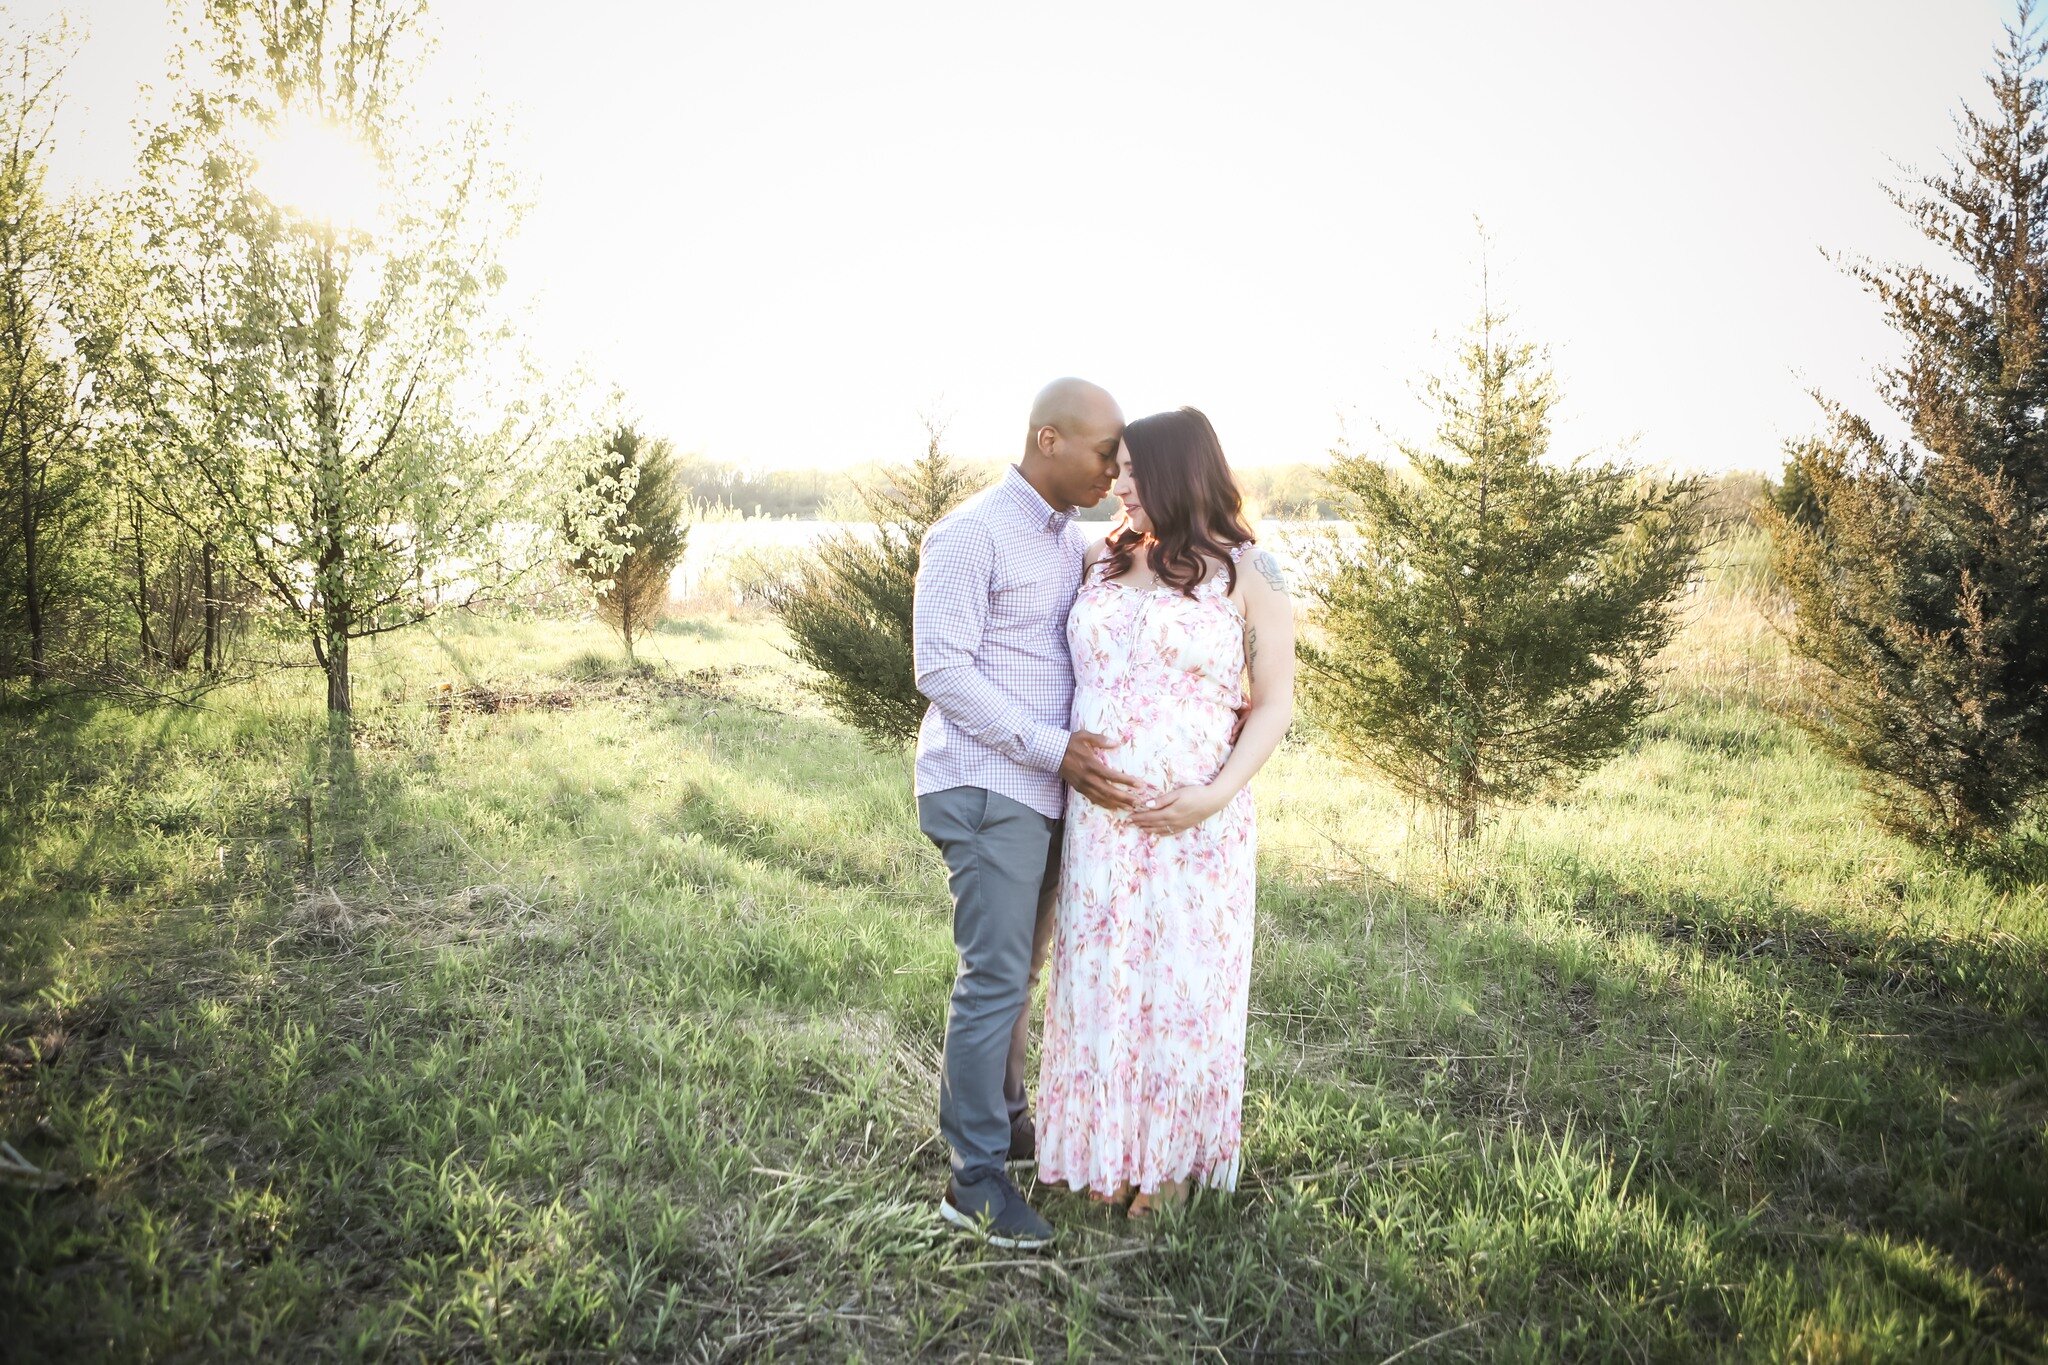 First outdoor shoot of the season!  We are now scheduling Maternity, Families, and Milestone outdoors - the leaves are here, the temps are up, and summer beauty has come to Illinois at last!! Would love to get you on the calendar and capture your mem